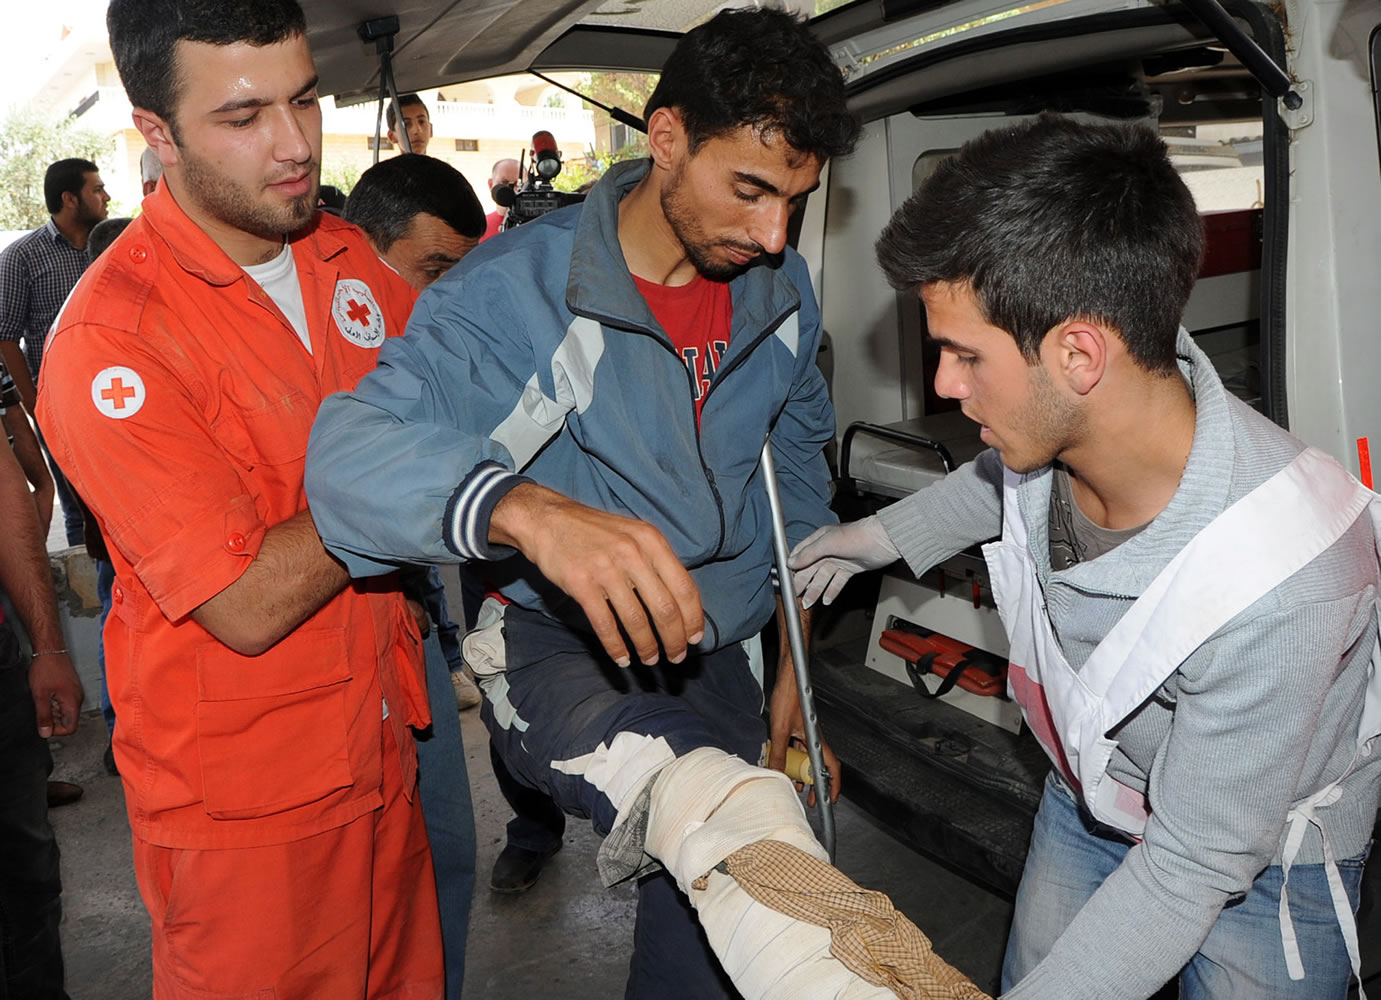 Associated Press
Members of the Lebanese Red Cross at a hospital in the Bekaa Valley, east of Beirut, help a Syrian man Saturday who was wounded in Qusair, Syria, during battles between rebels and Syrian government forces. A Lebanese Red Cross official said they evacuated 28 people who were wounded in Qusair from the Syrian border.